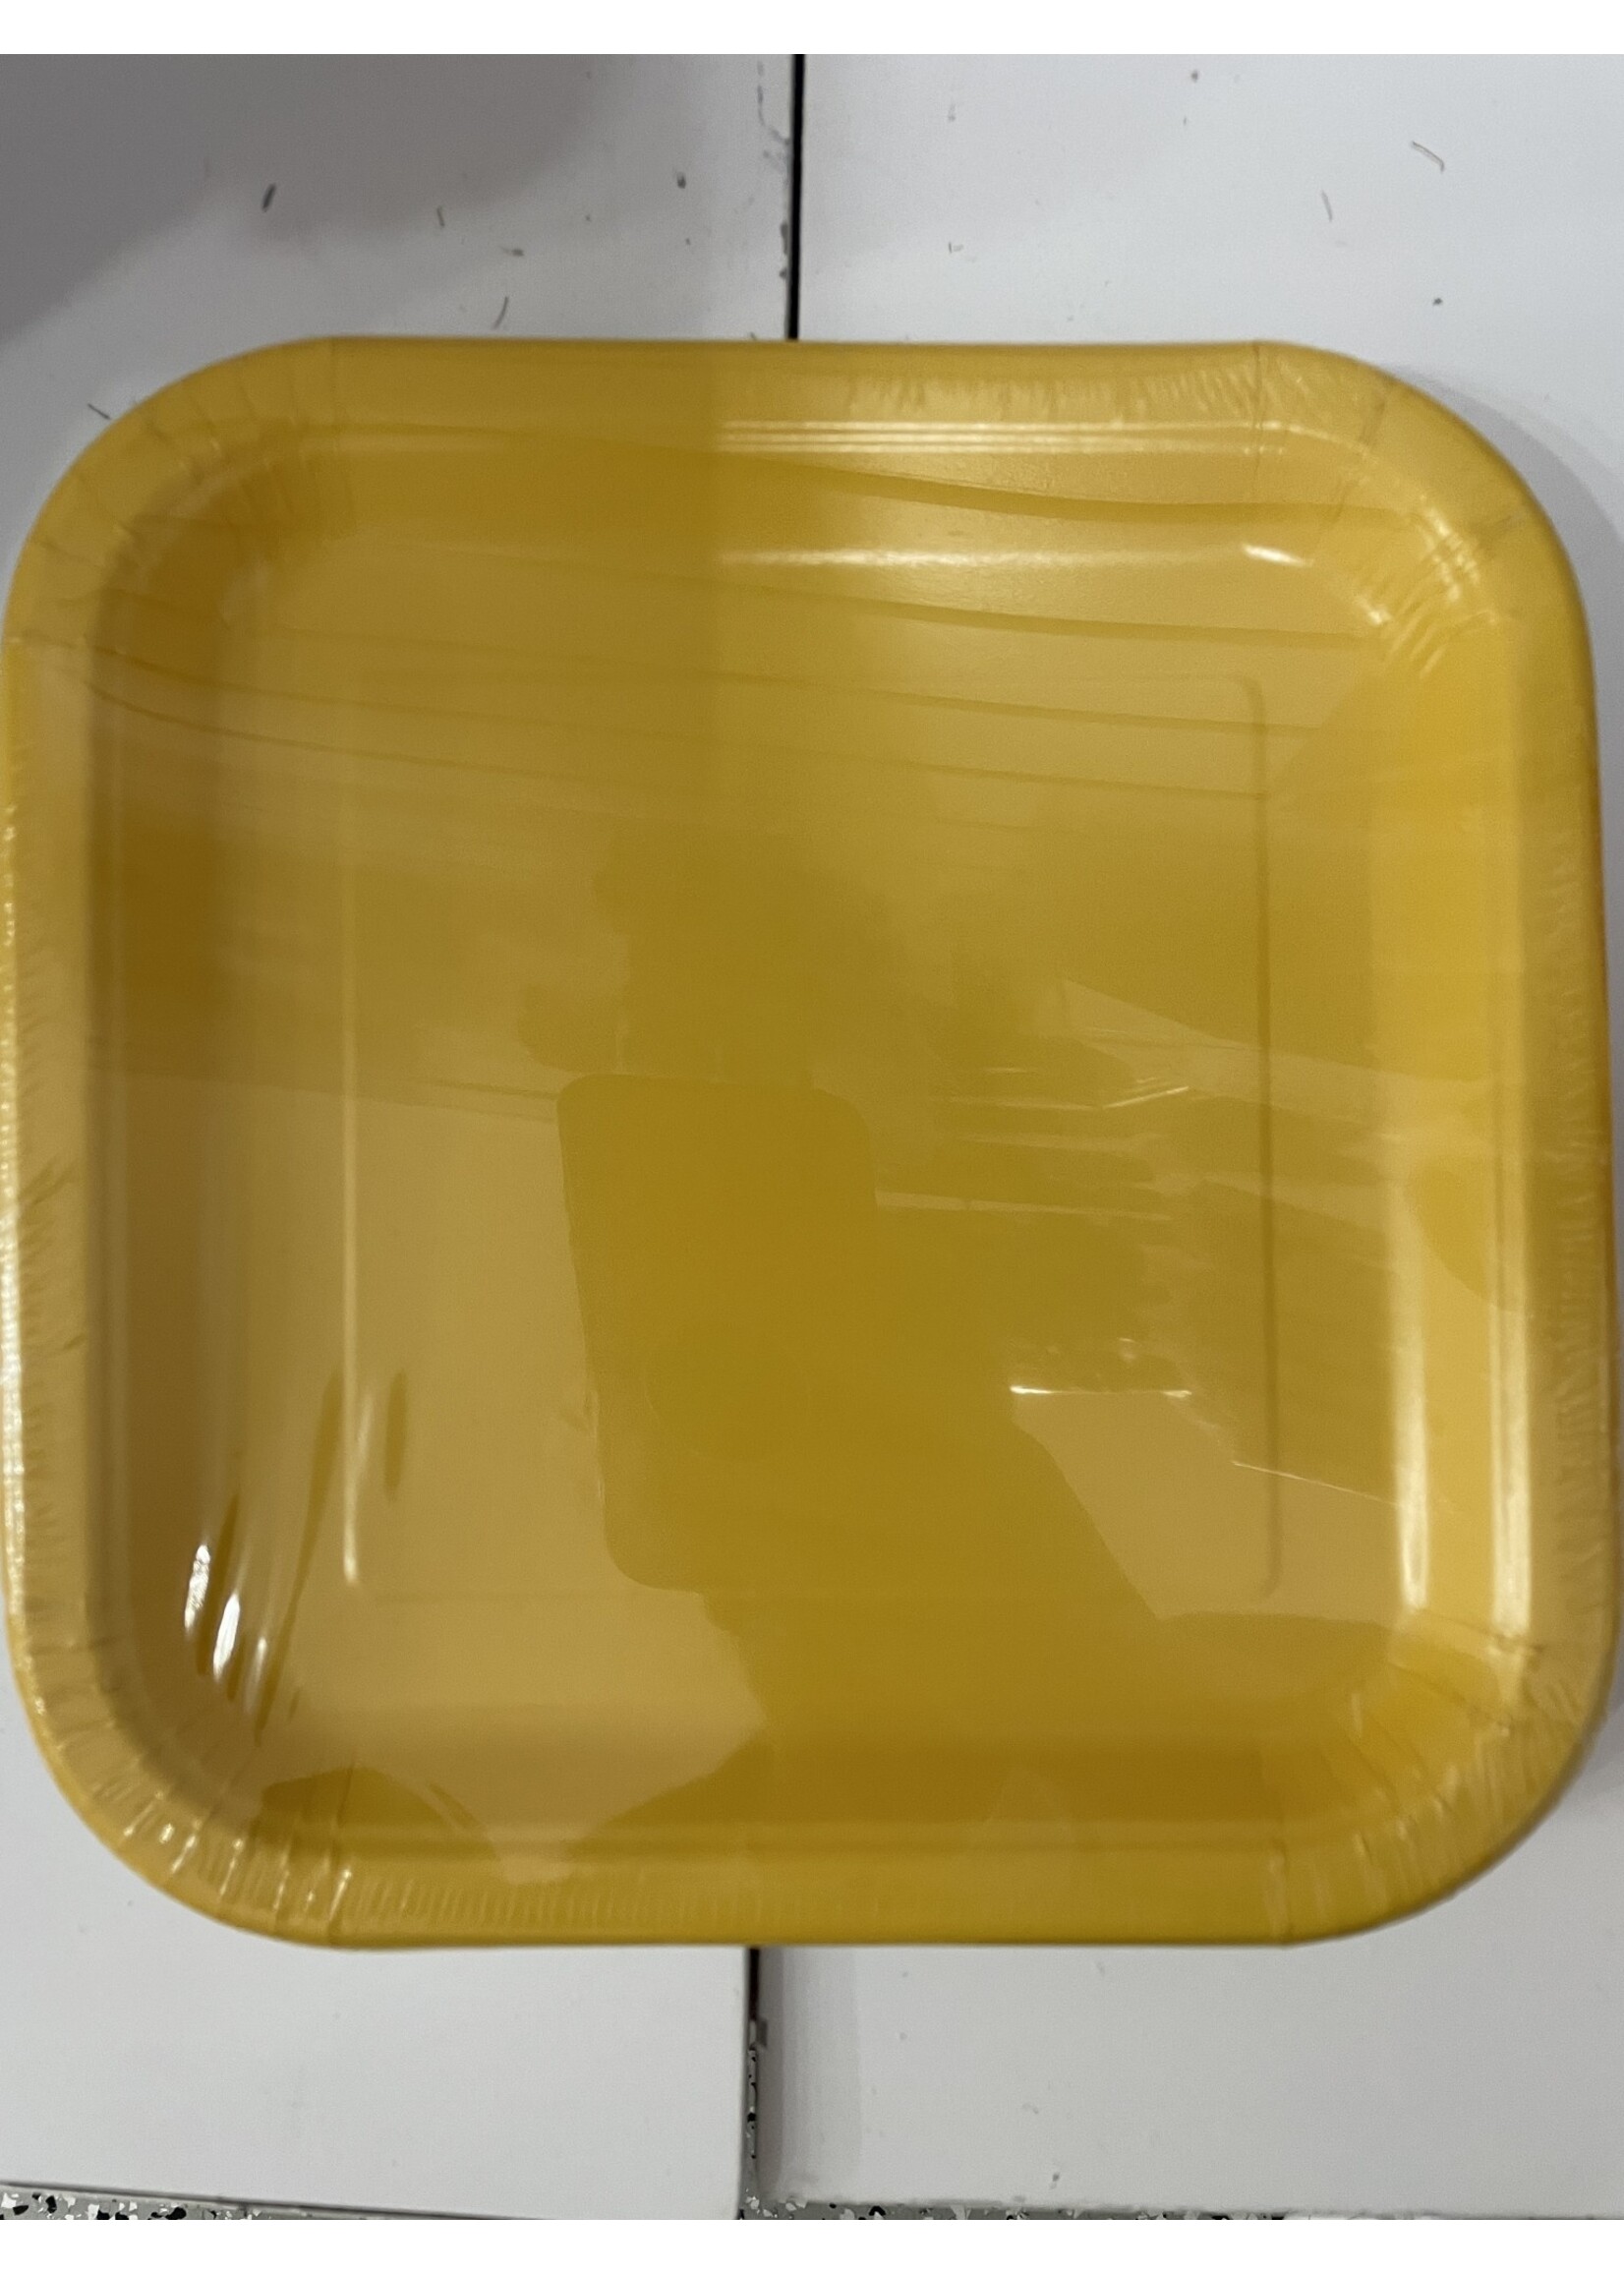 14 SNFLWR YELLOW 9" SQUARE PLT